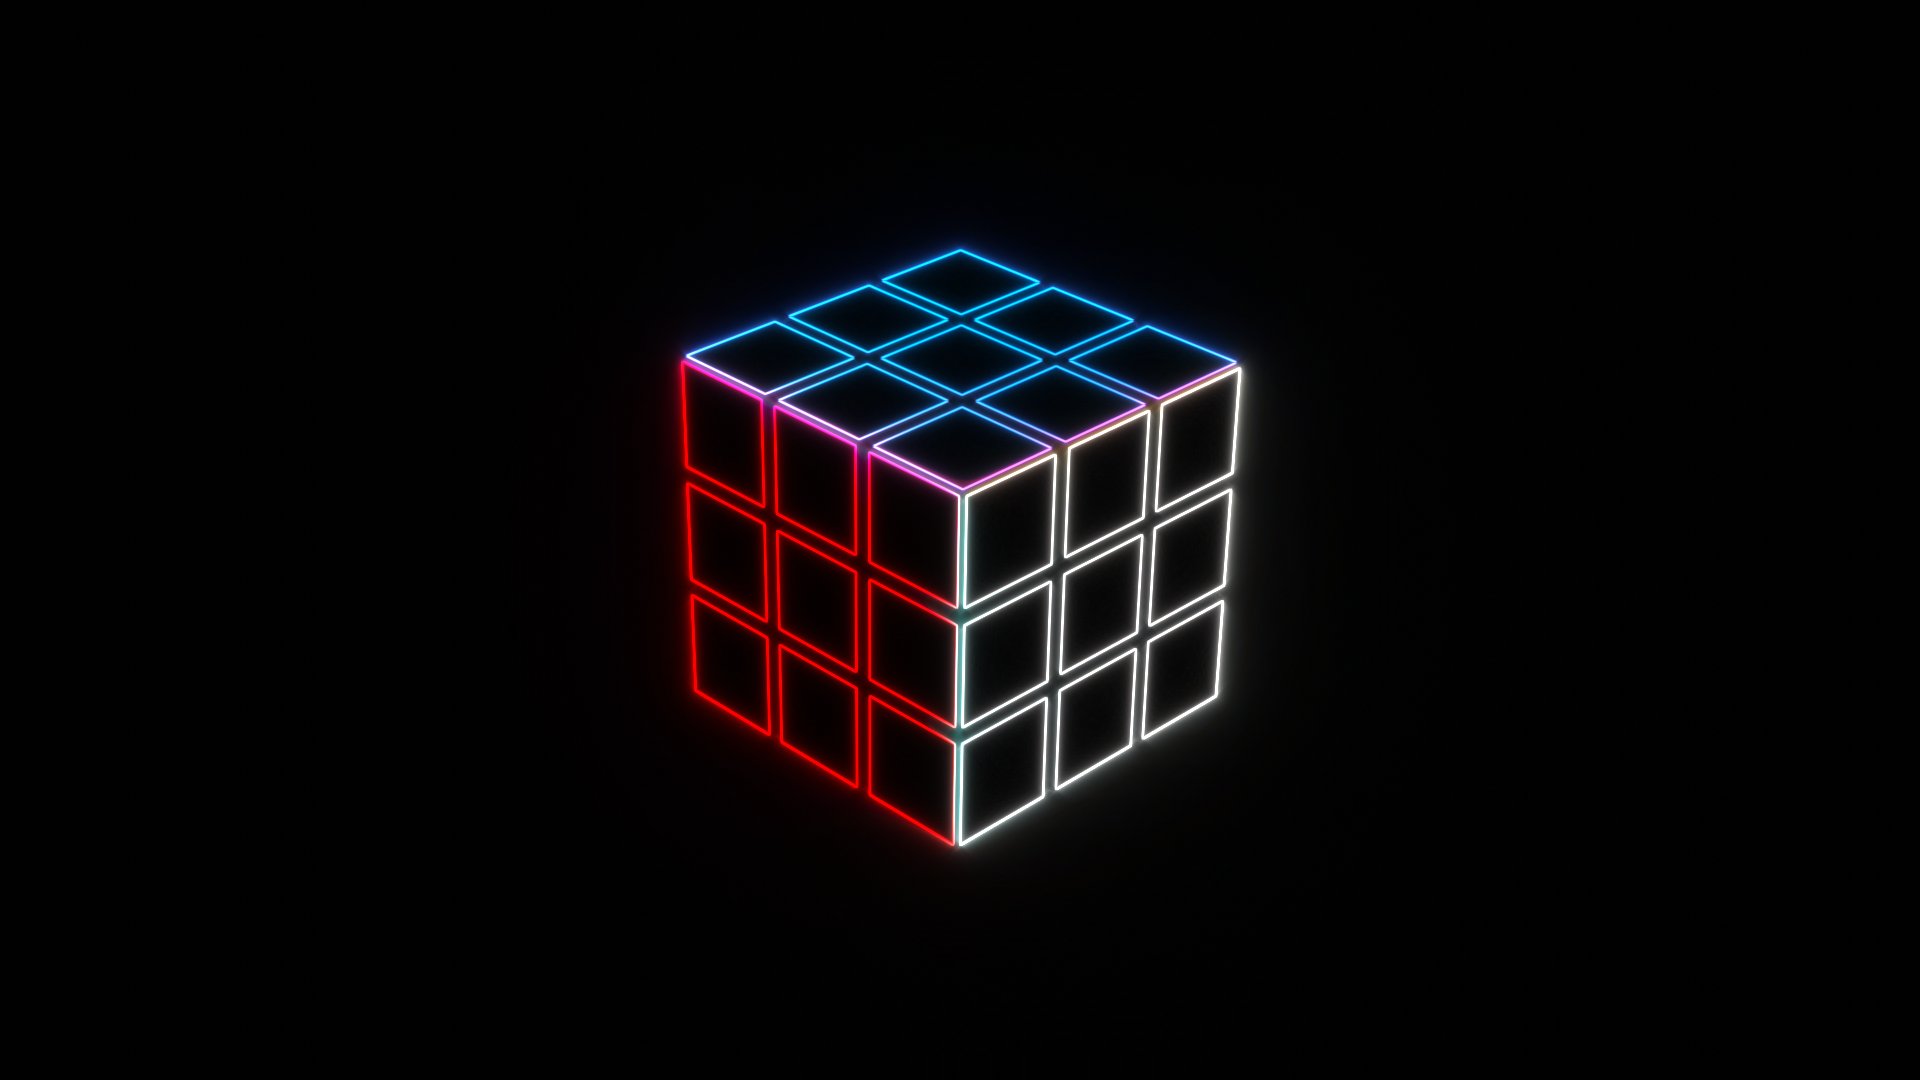 Rubiks Cube Background Wallpapers.